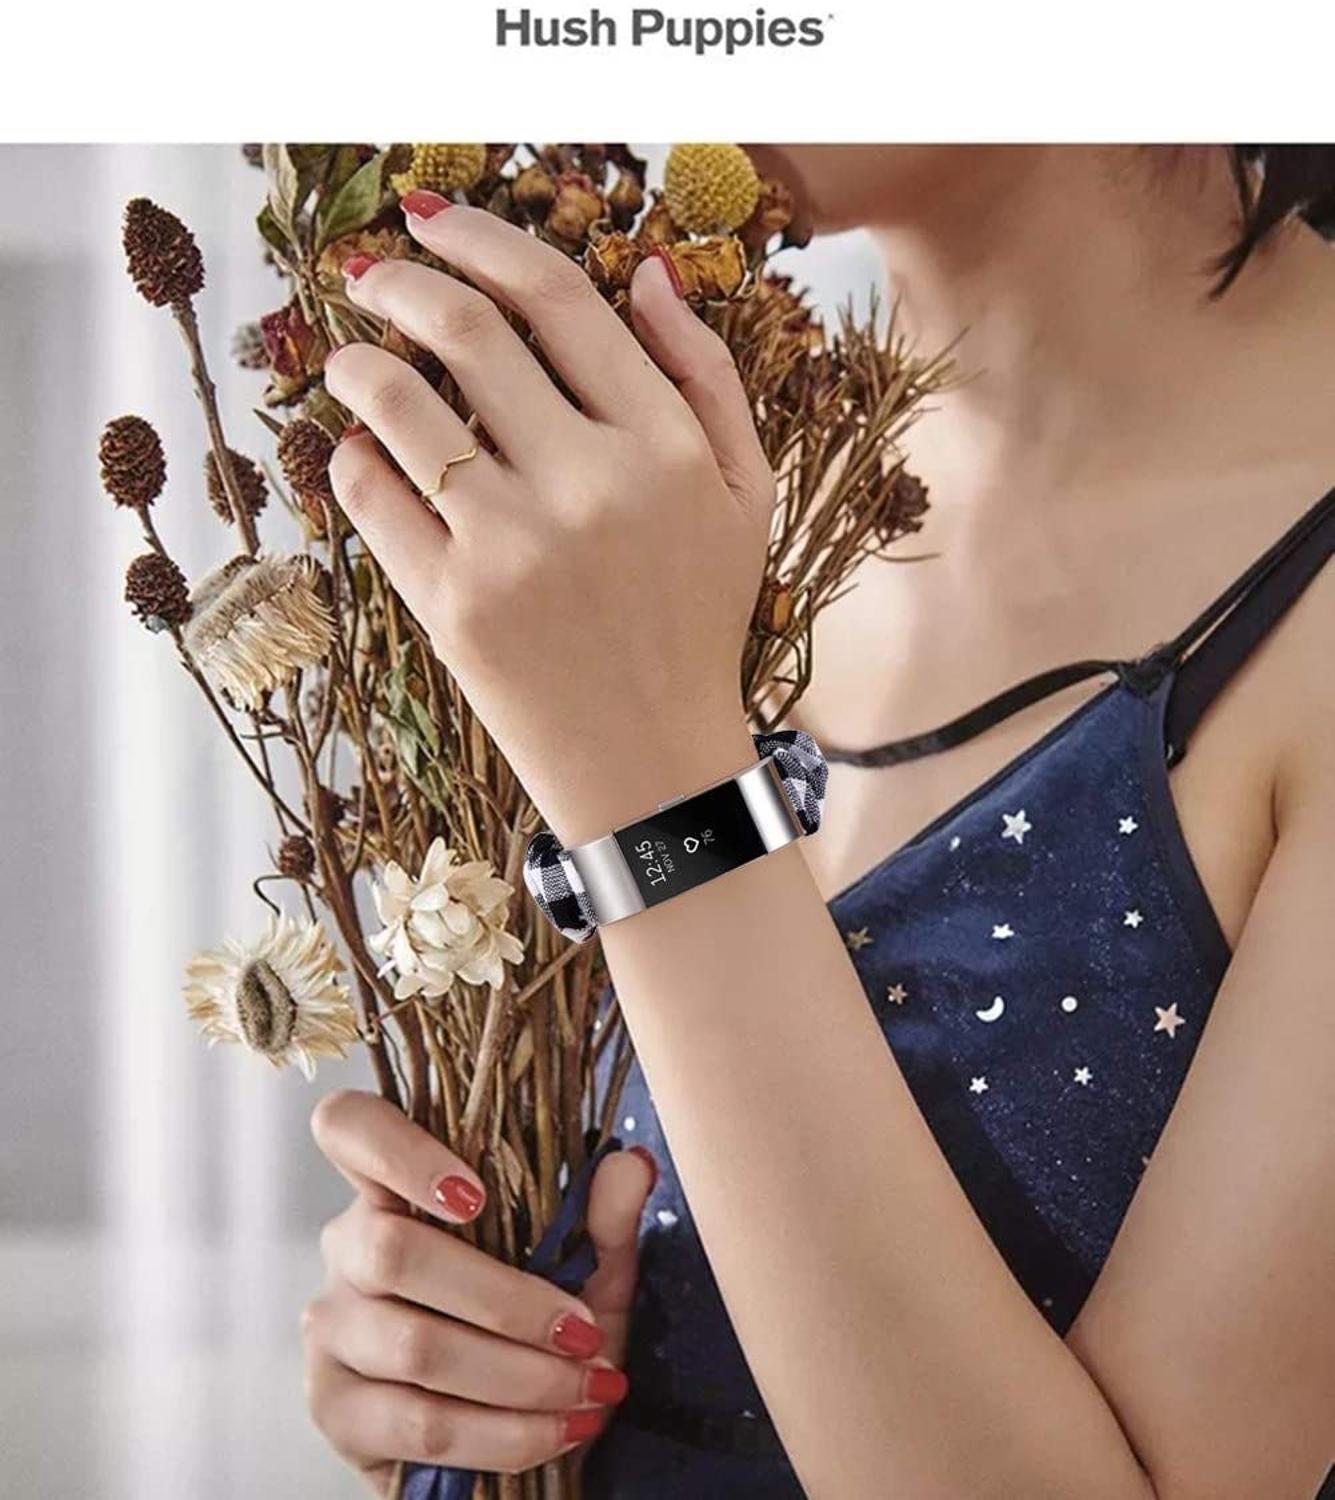 fitbit charge 4 women